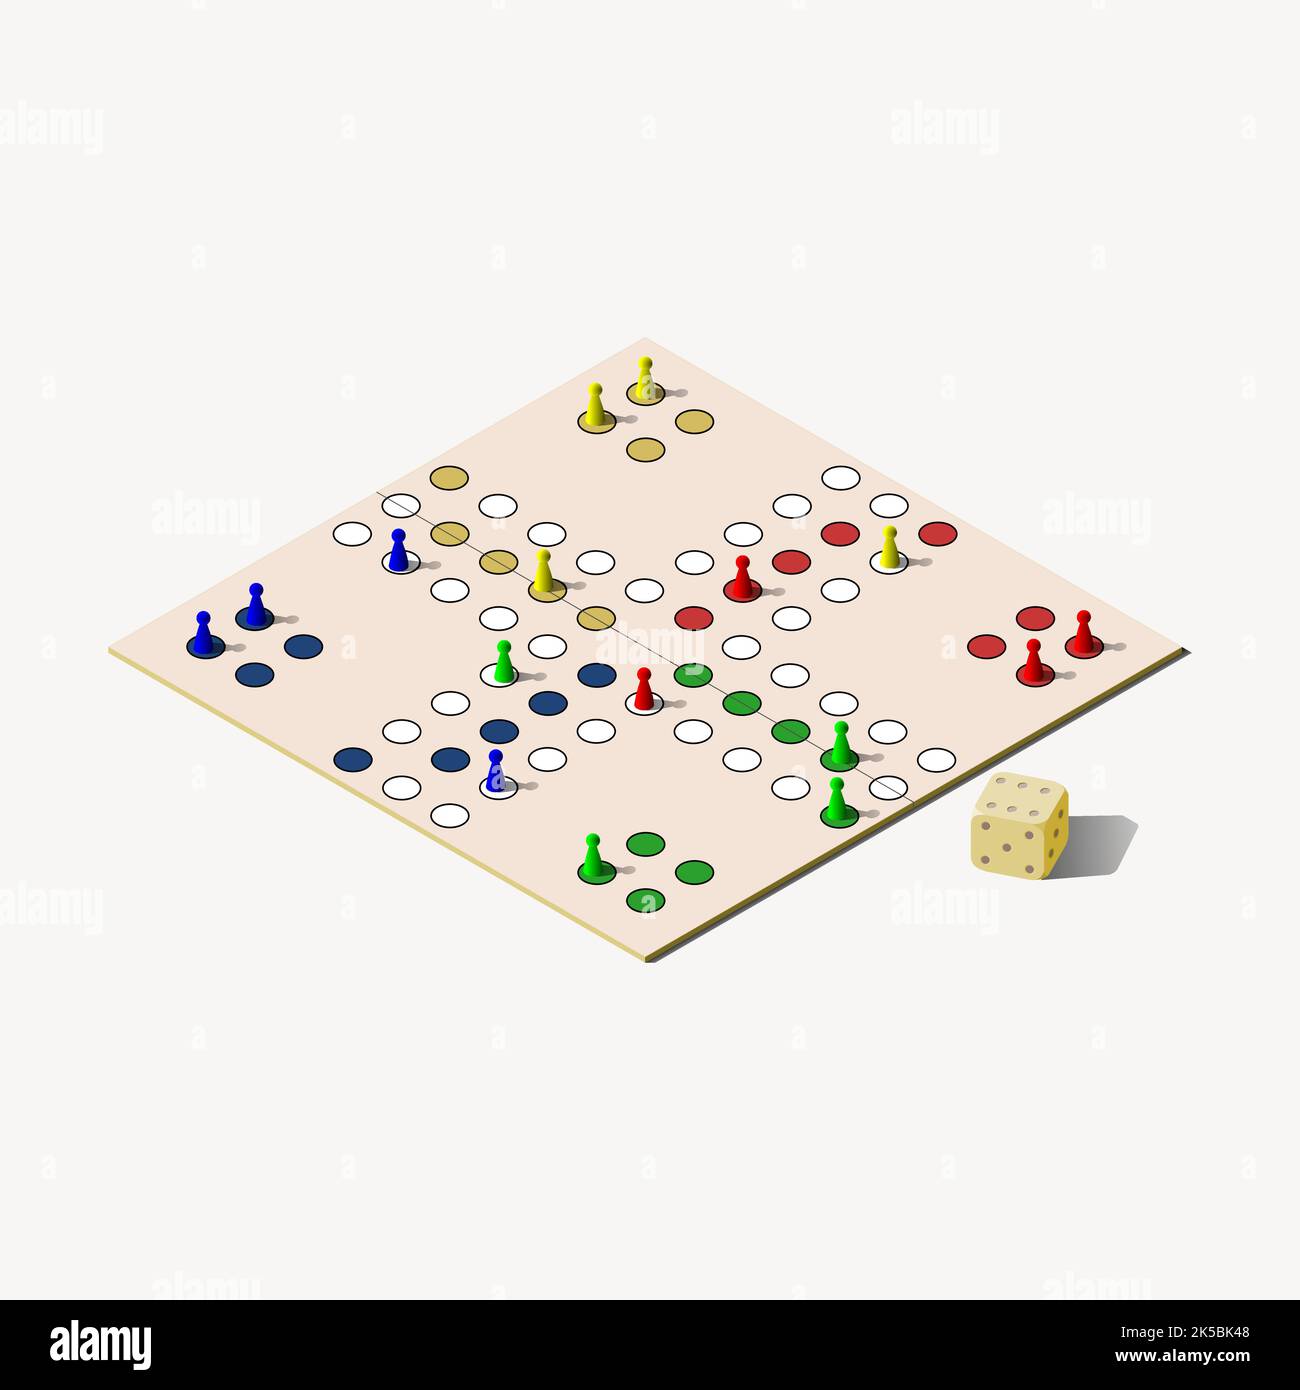 Ludo Board Game For Printing With Vector Illustration Stock